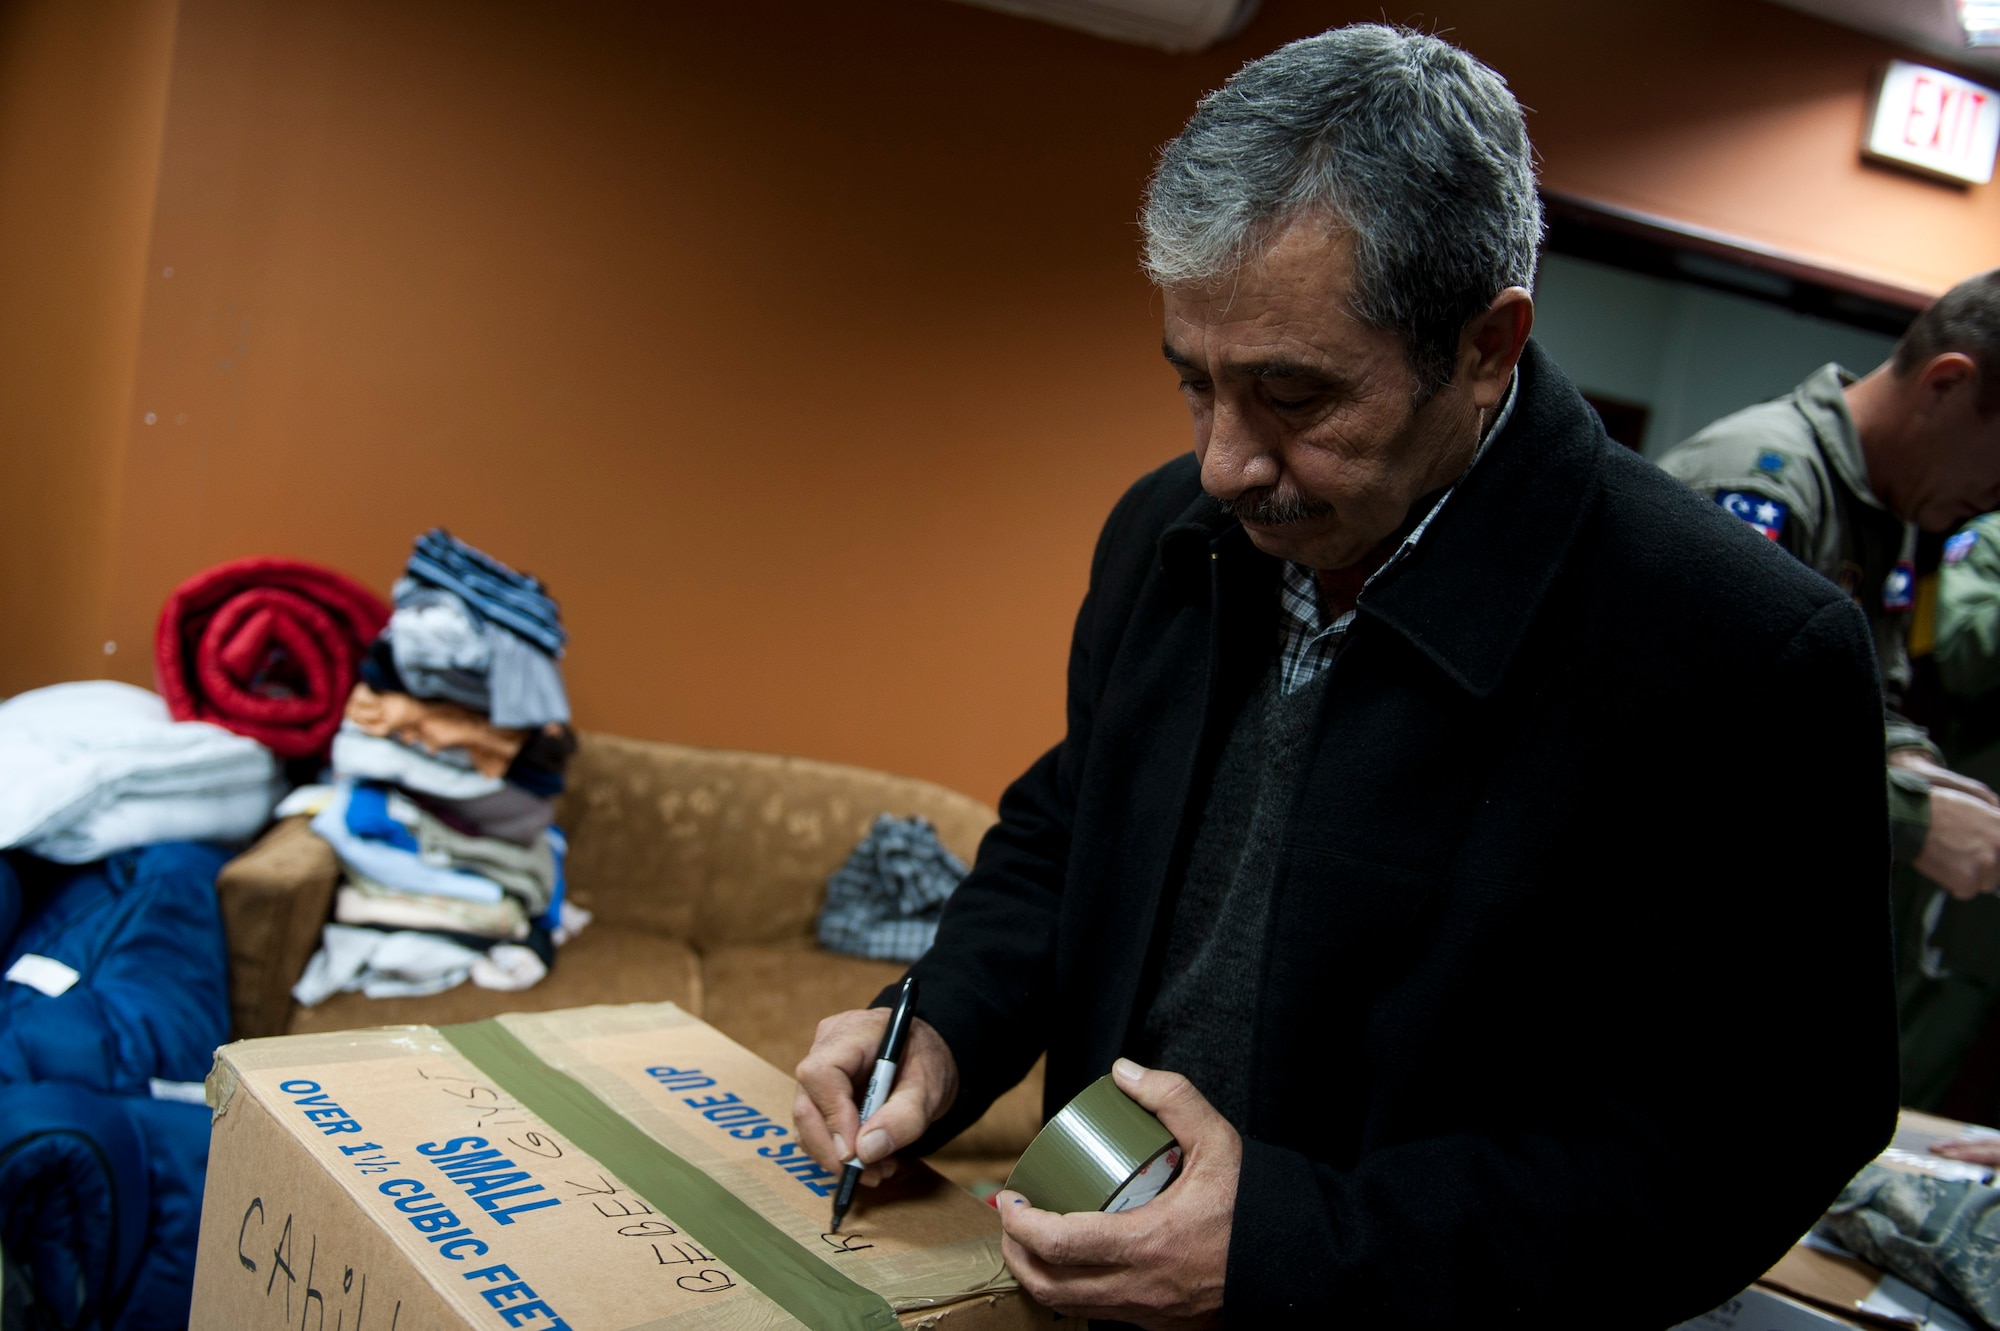 Mehmet Asikbekiroglu, a local business owner, marks supply boxes for Turkish earthquake victims with Turkish and English labels Nov. 18, 2011, at Incirlik Air Base, Turkey. On Oct. 23, a 7.2-magnitude earthquake occurred near Van, Turkey, killing more than 600 and injuring more than 1,000. The 39th Air Base Wing chapel coordinated the collection of basic hygiene items, winter clothing and footwear donated to the Turkish Red Crescent for those affected. (U.S. Air Force photo by Tech. Sgt. Michael B. Keller/Released)